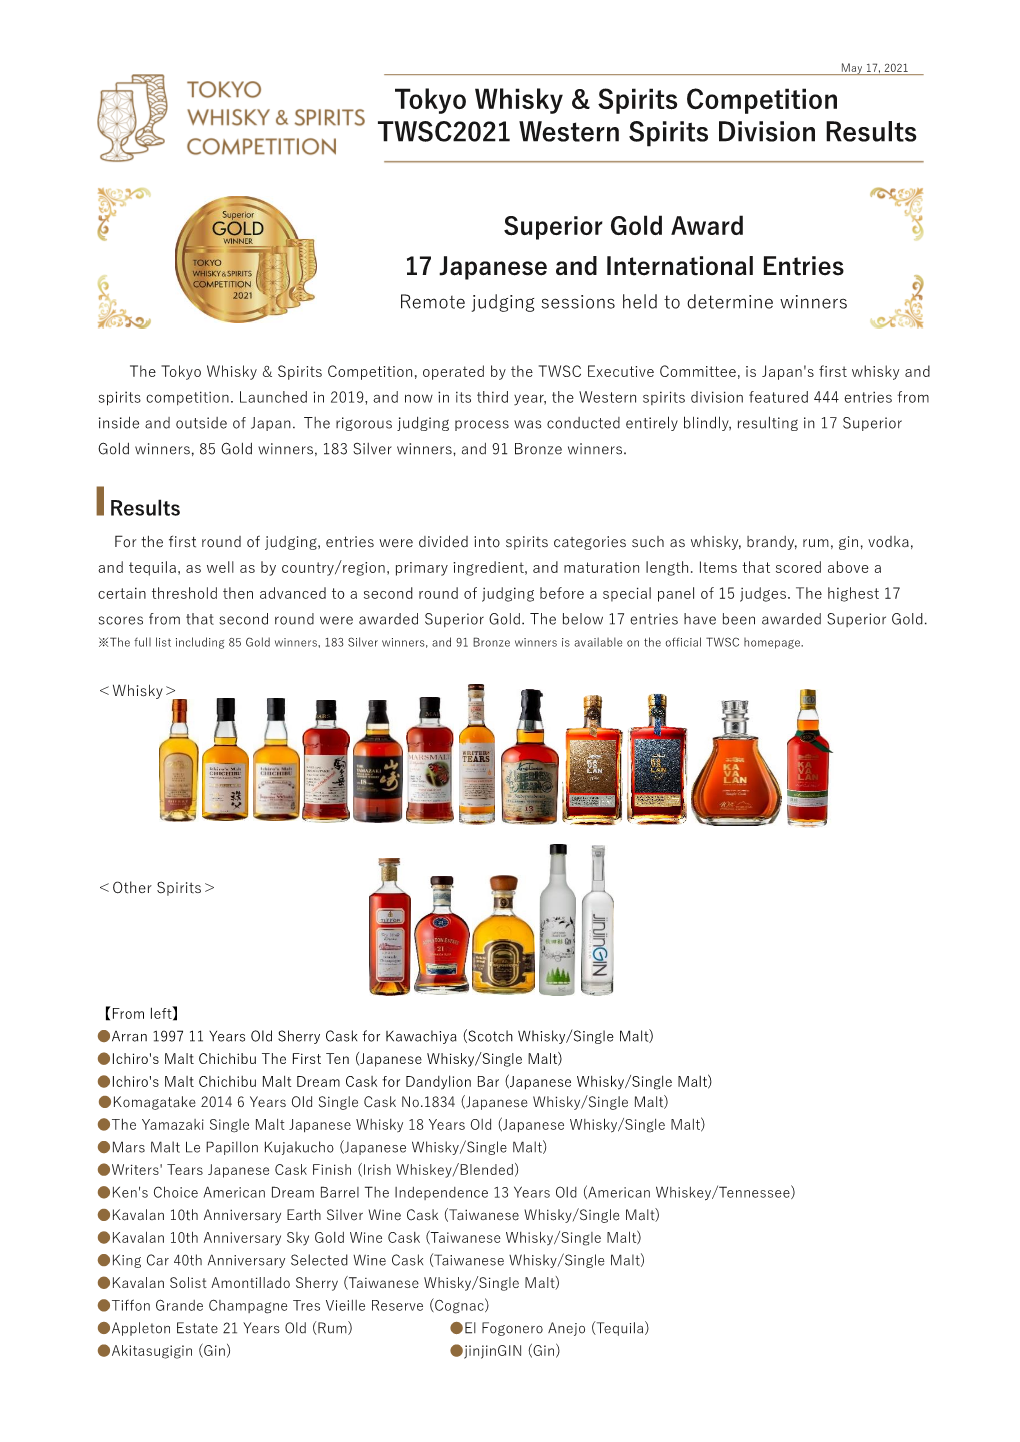 Tokyo Whisky & Spirits Competition TWSC2021 Western Spirits Division